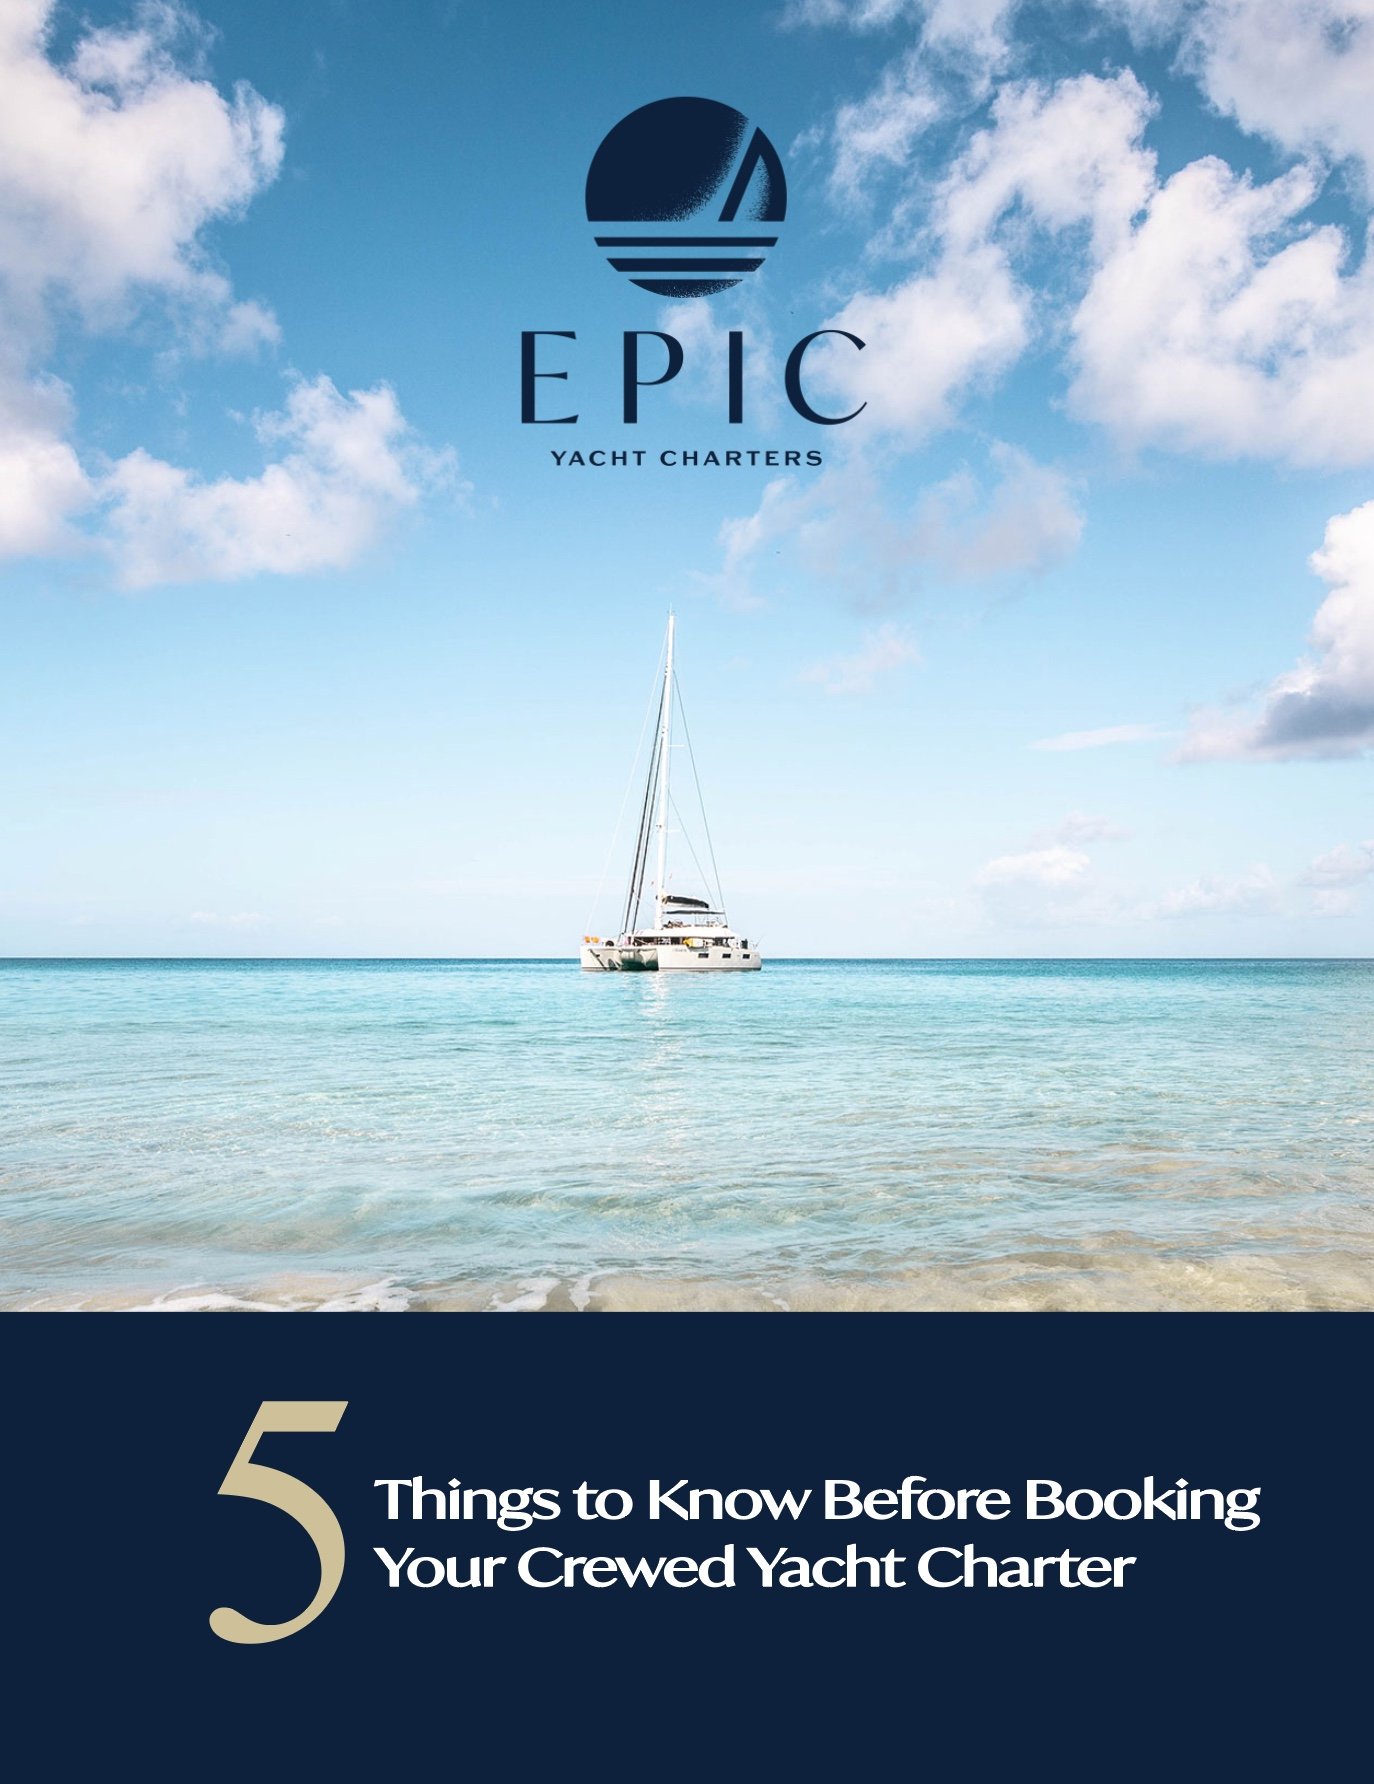 5 Things to Know about booking a crewed charter yacht